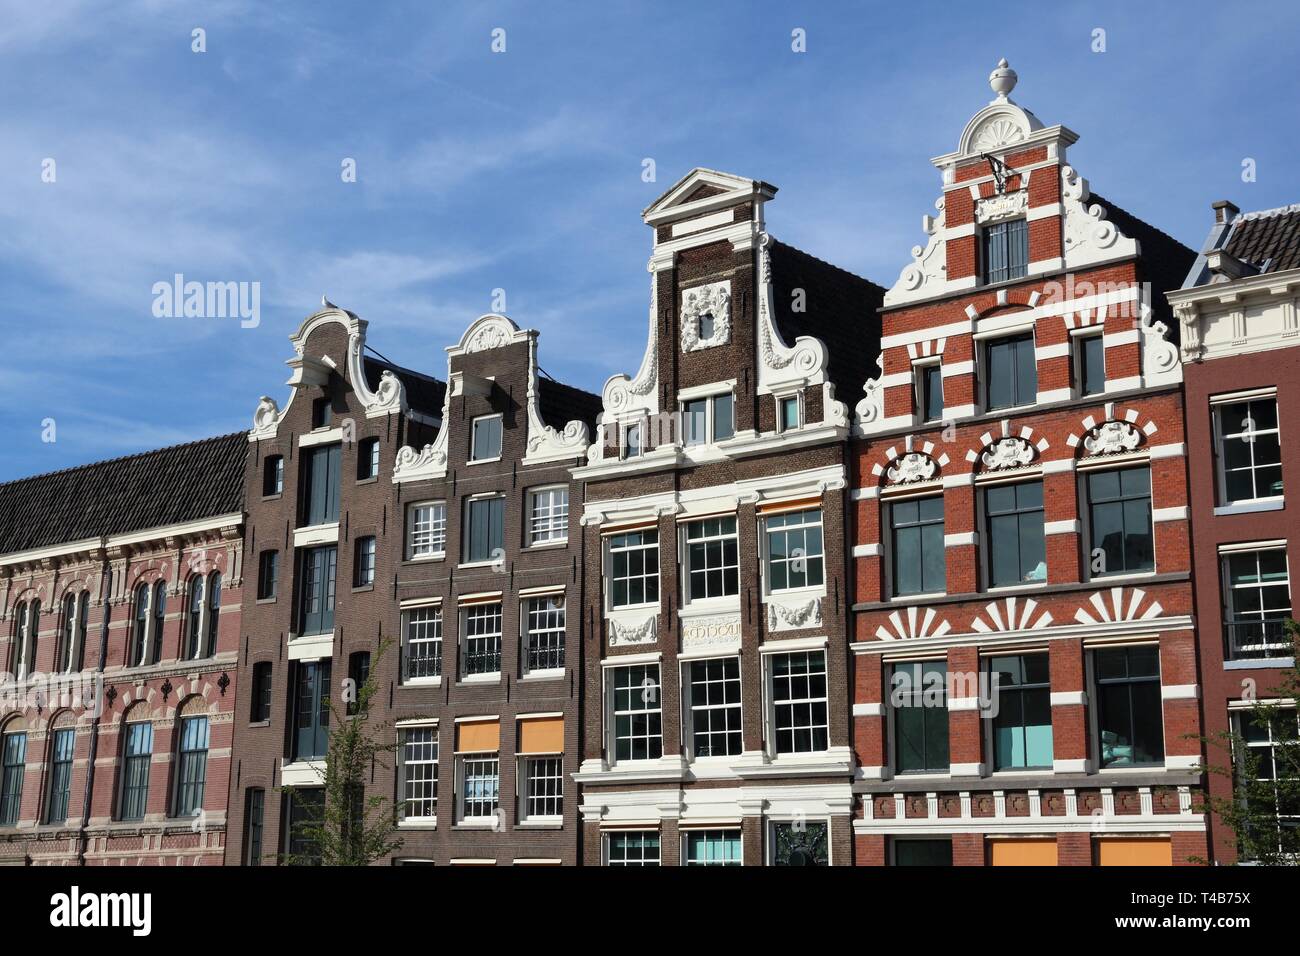 Amsterdam city architecture - Oude Turfmarkt residential buildings. Netherlands rowhouse. Stock Photo